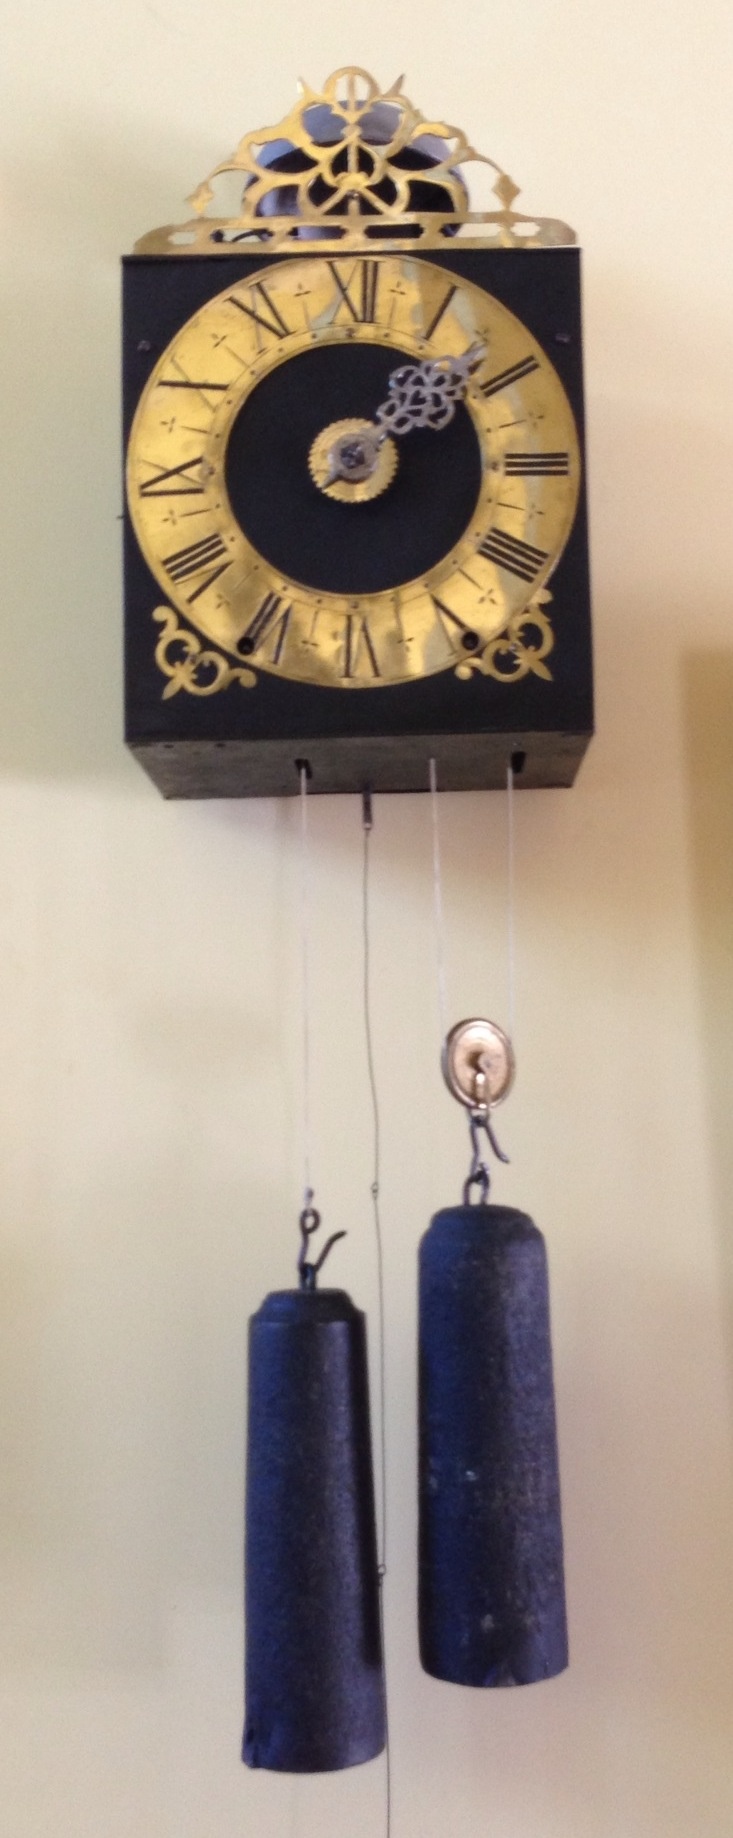 Comtoise French farm clock. Only one hand needed back 250 yrs ago